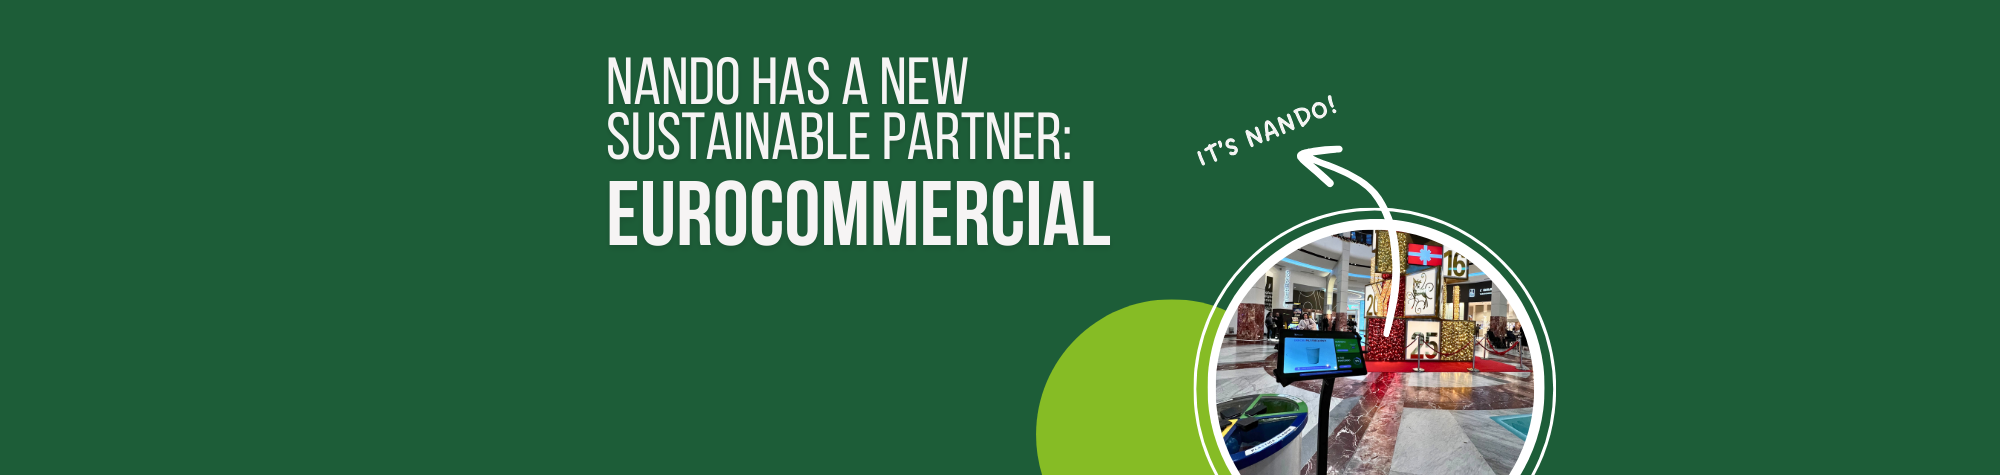 EUROCOMMERCIAL Properties NV is our new sustainable partner!